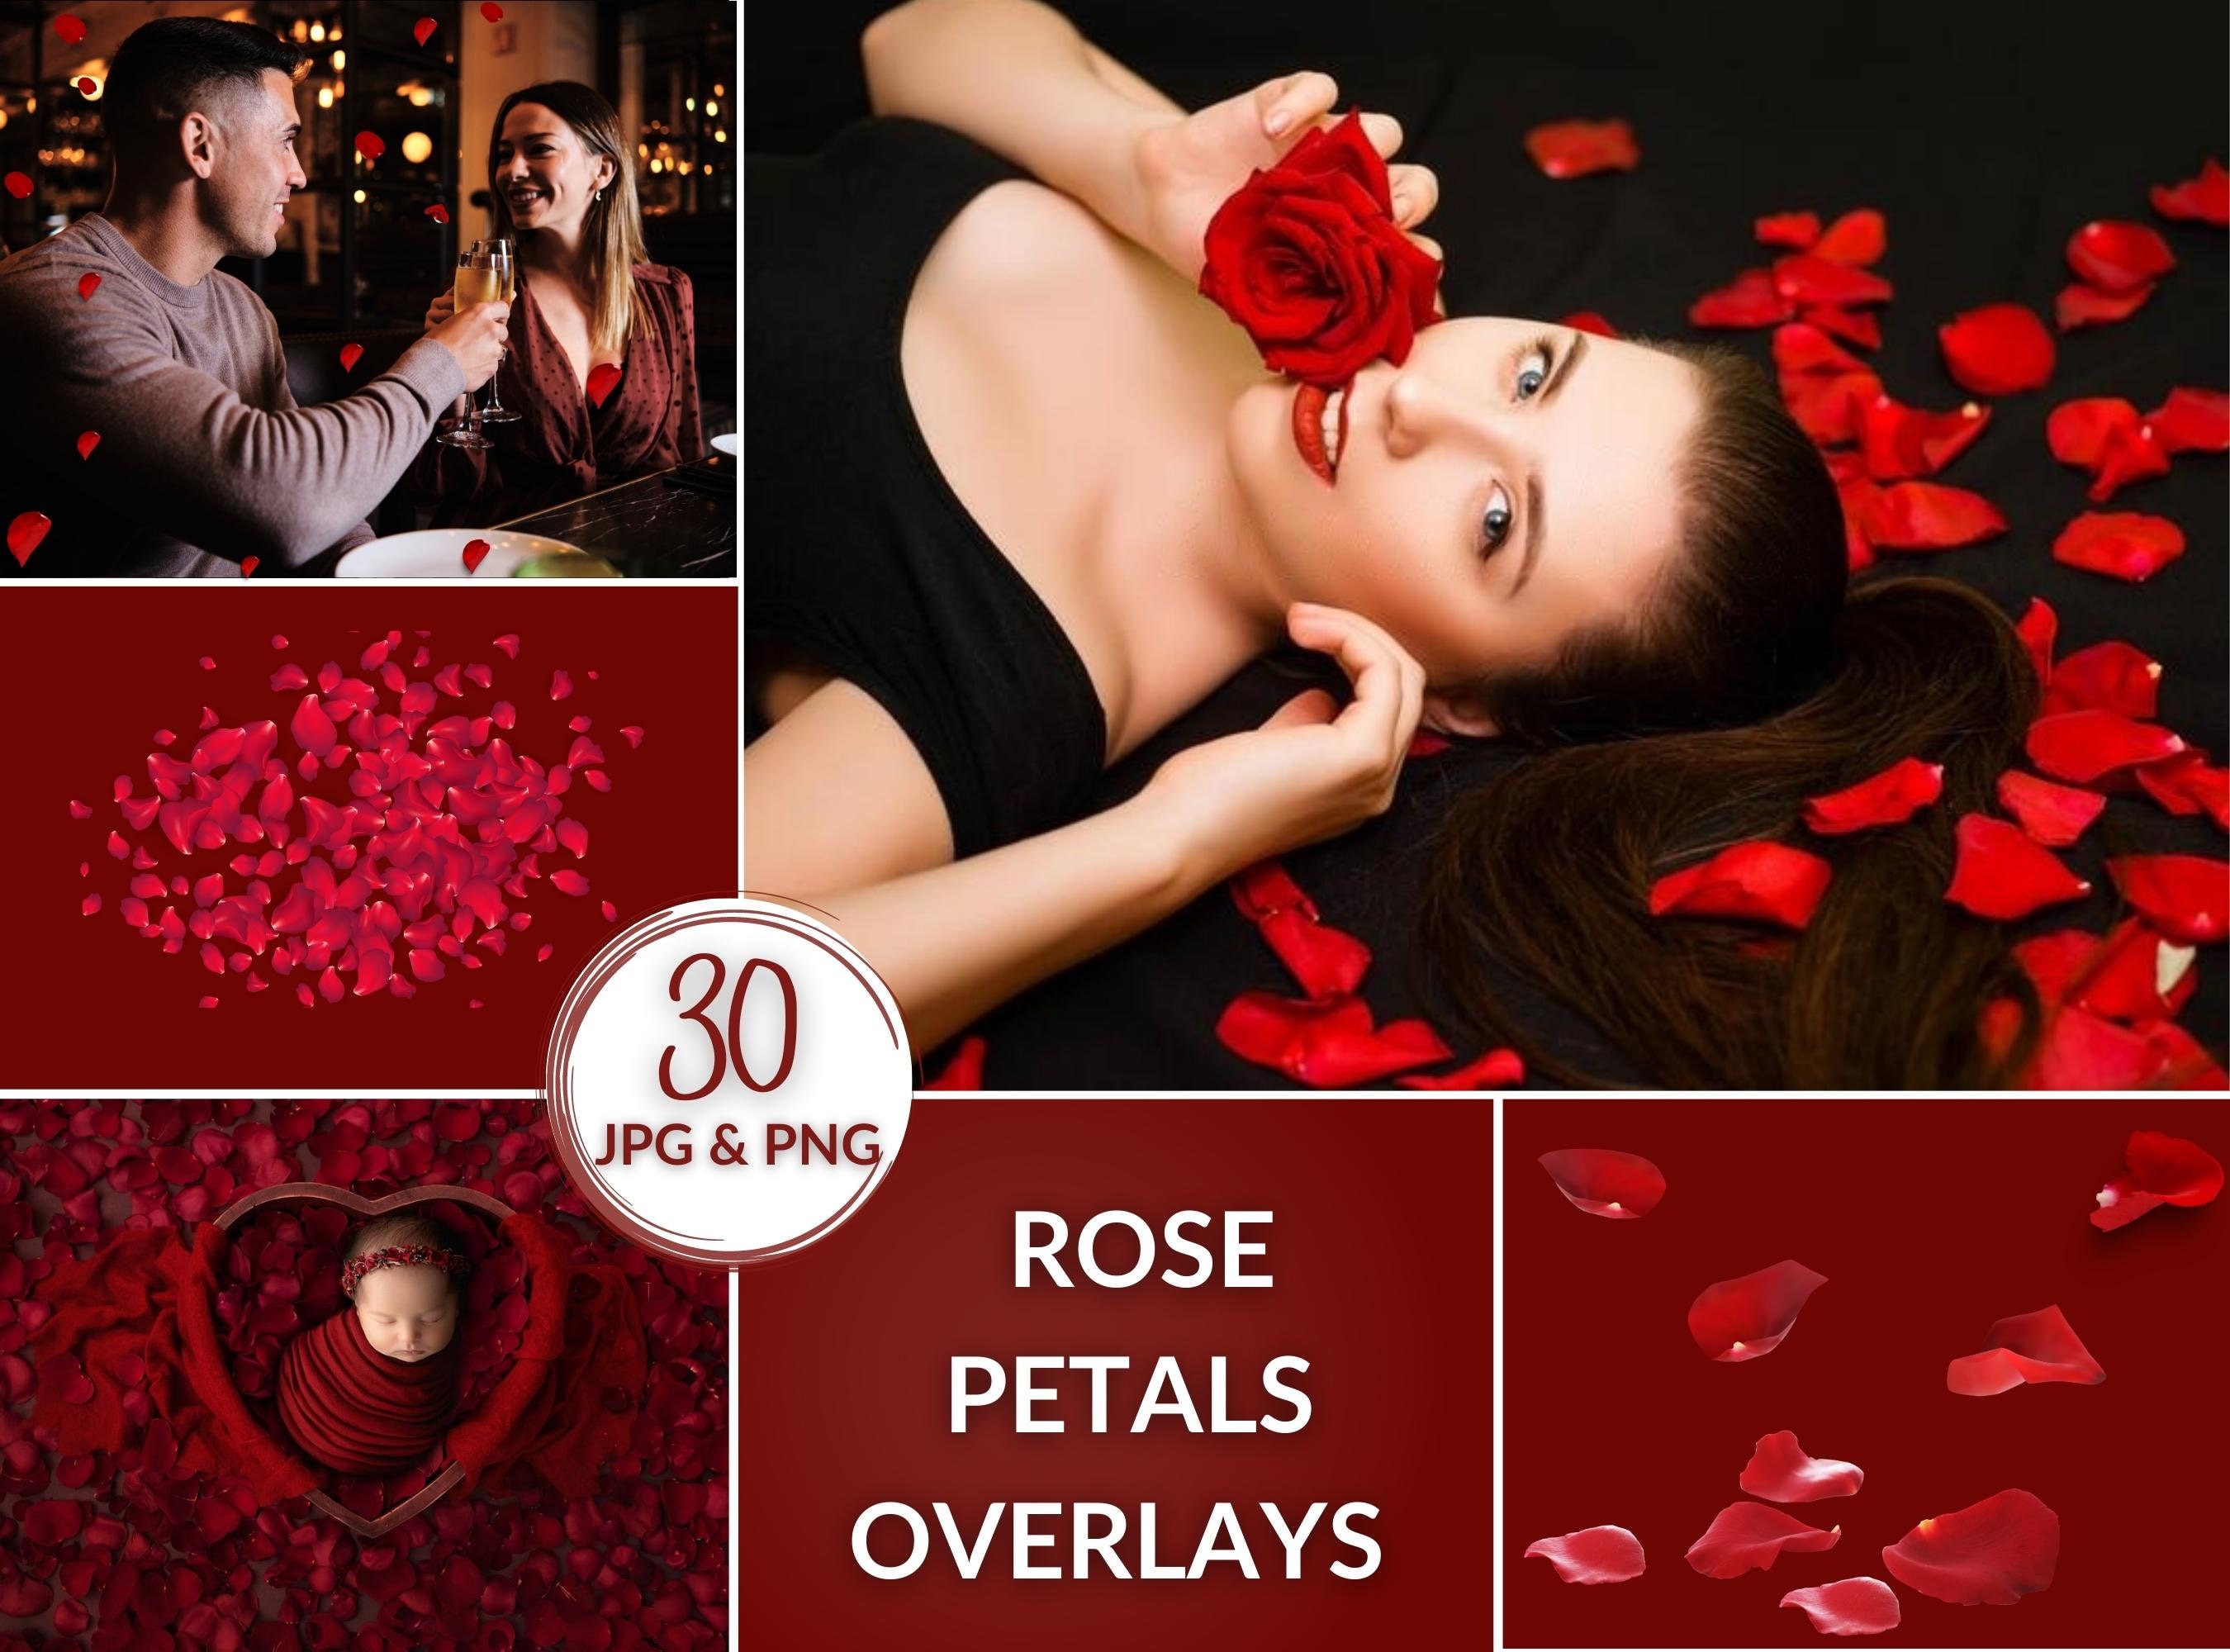 Falling Rose Petals Overlay PNGs Graphic by OA Design · Creative Fabrica